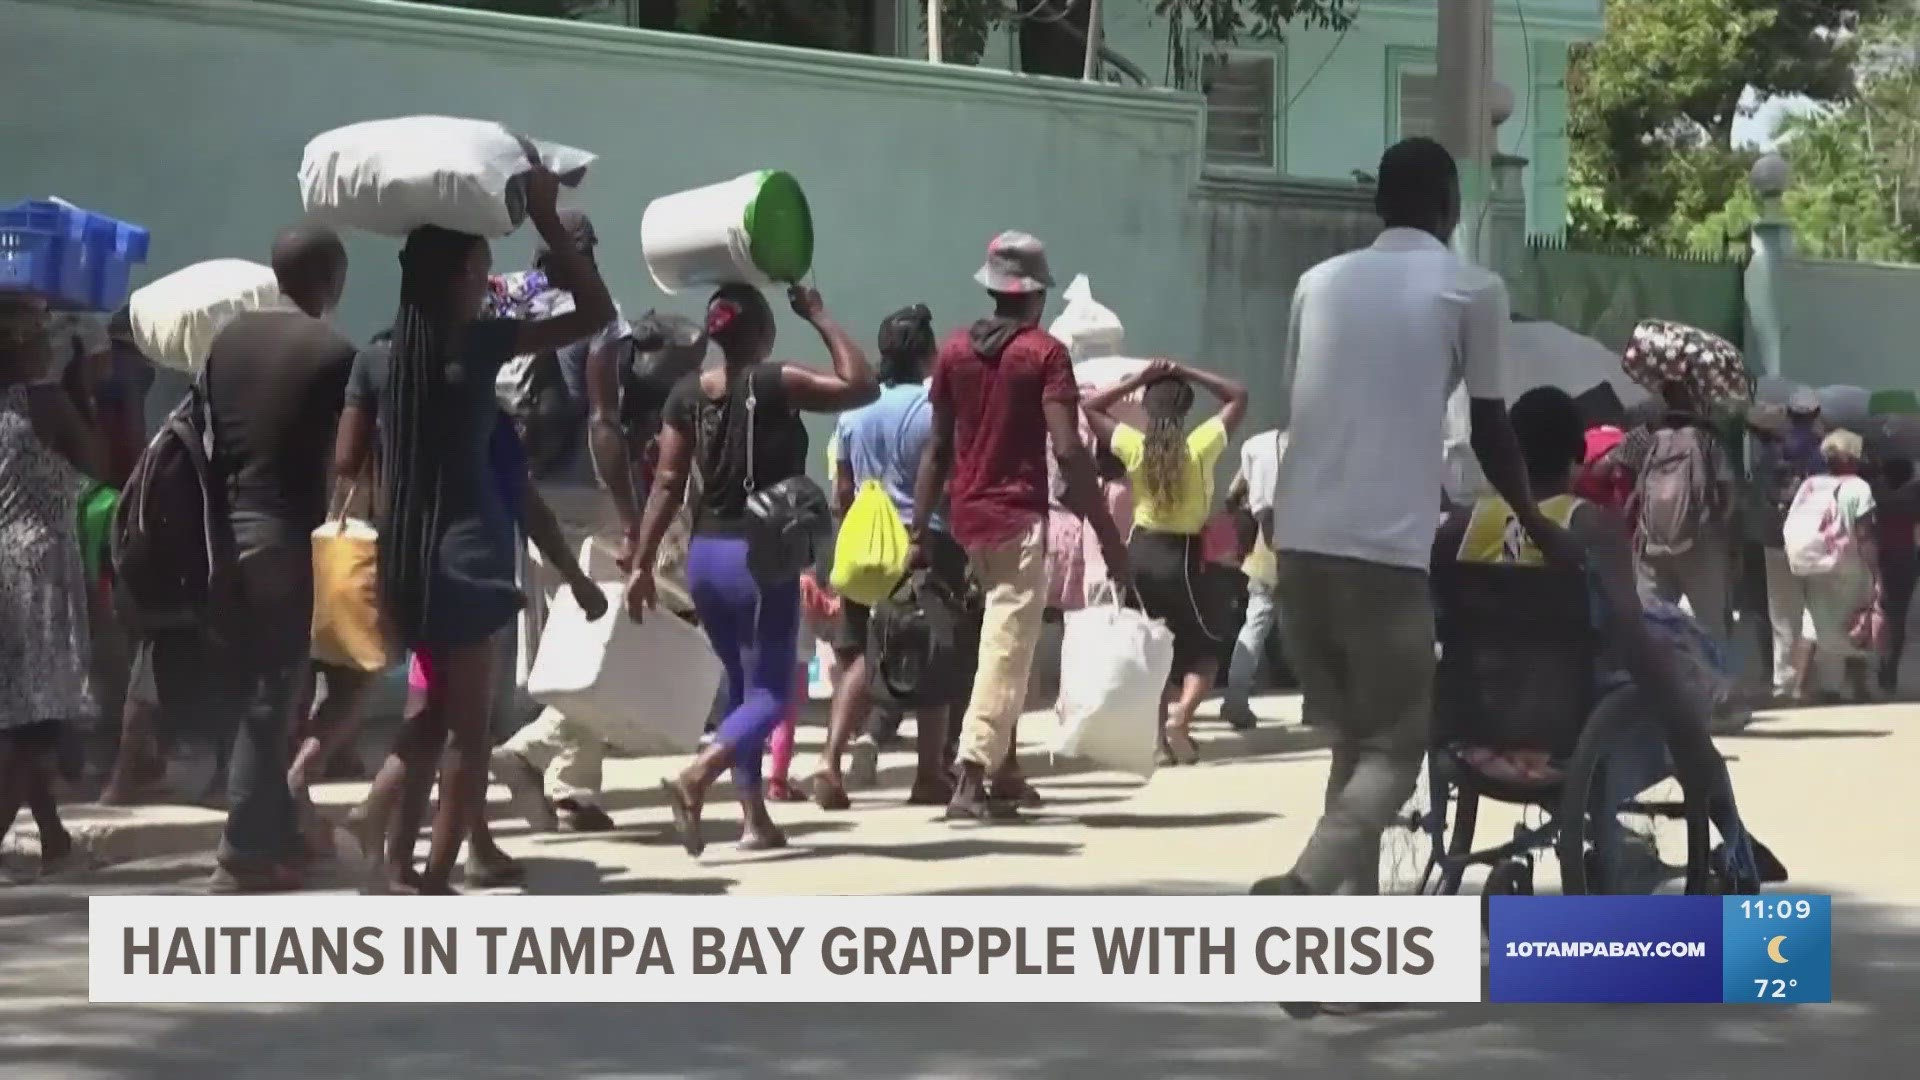 Governor DeSantis is deploying the National Guard to prevent a potential influx of migrants from Haiti.